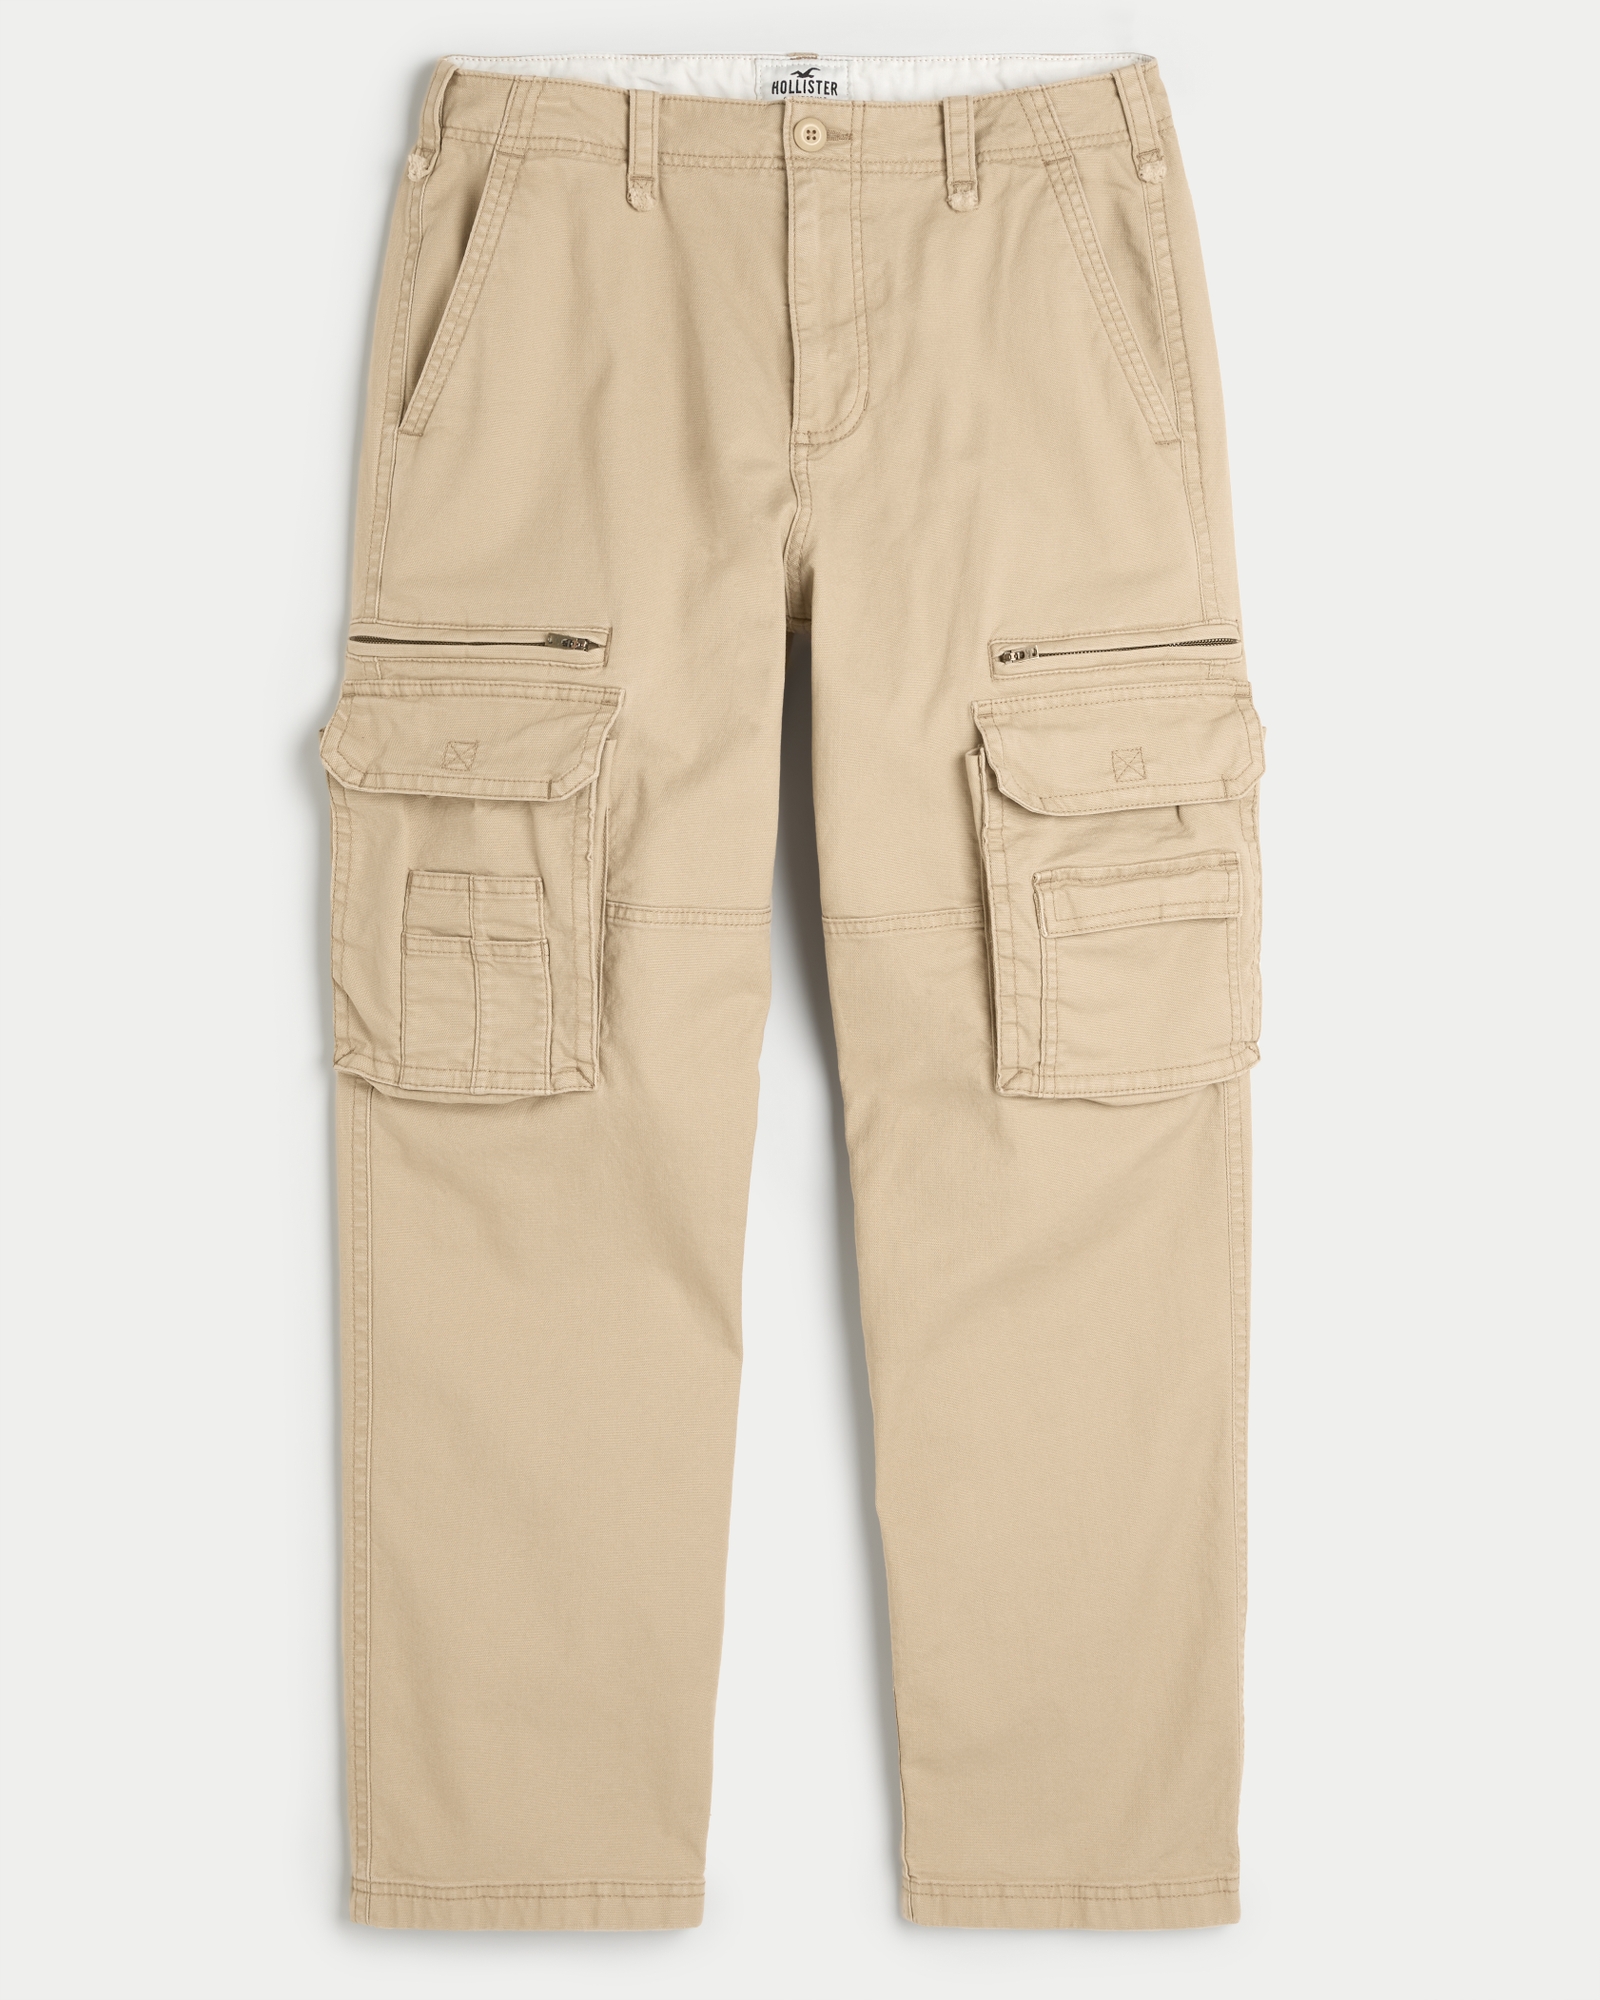 https://img.hollisterco.com/is/image/anf/KIC_330-4951-0043-475_prod1.jpg?policy=product-extra-large